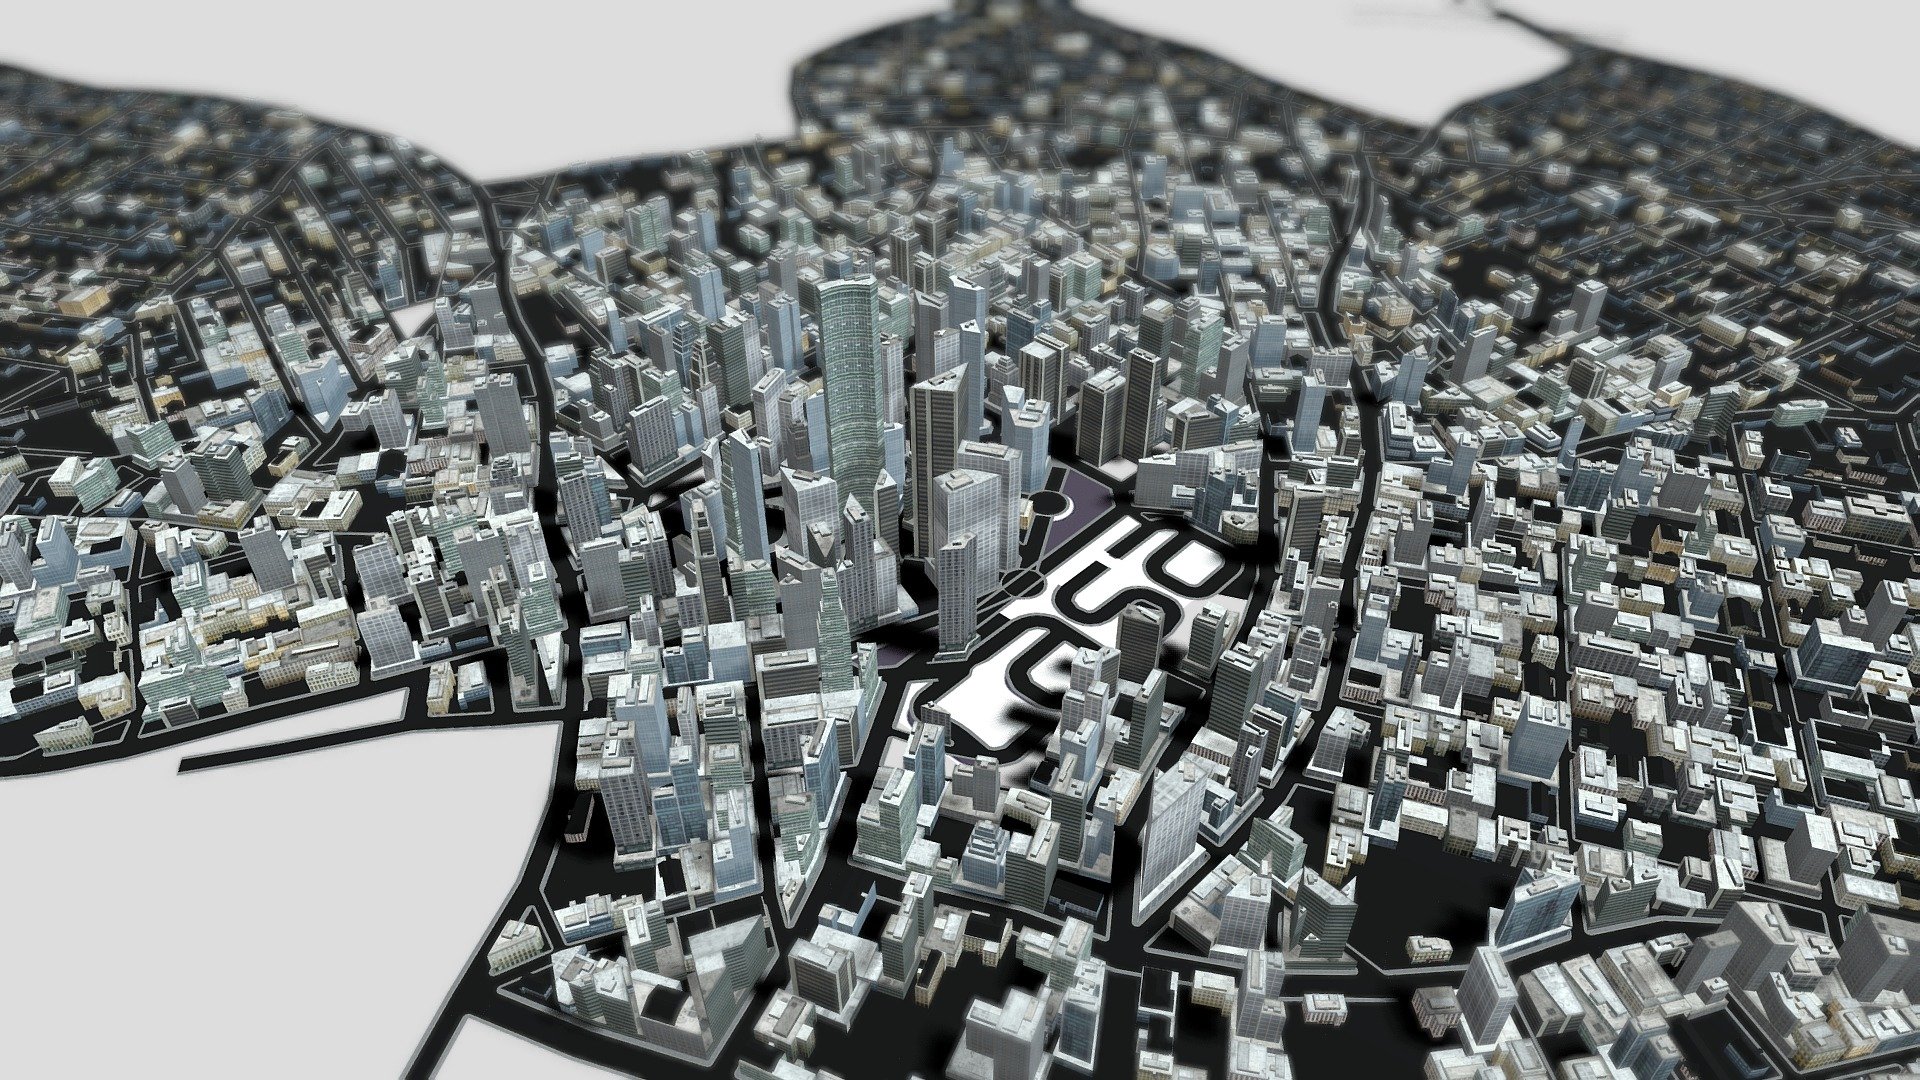 3D City made using the CASA Logo as a starting point for procedural modelling of the streets and buildings. Made as part of the first CASA Masters course at University College London, circa 2010 3d model